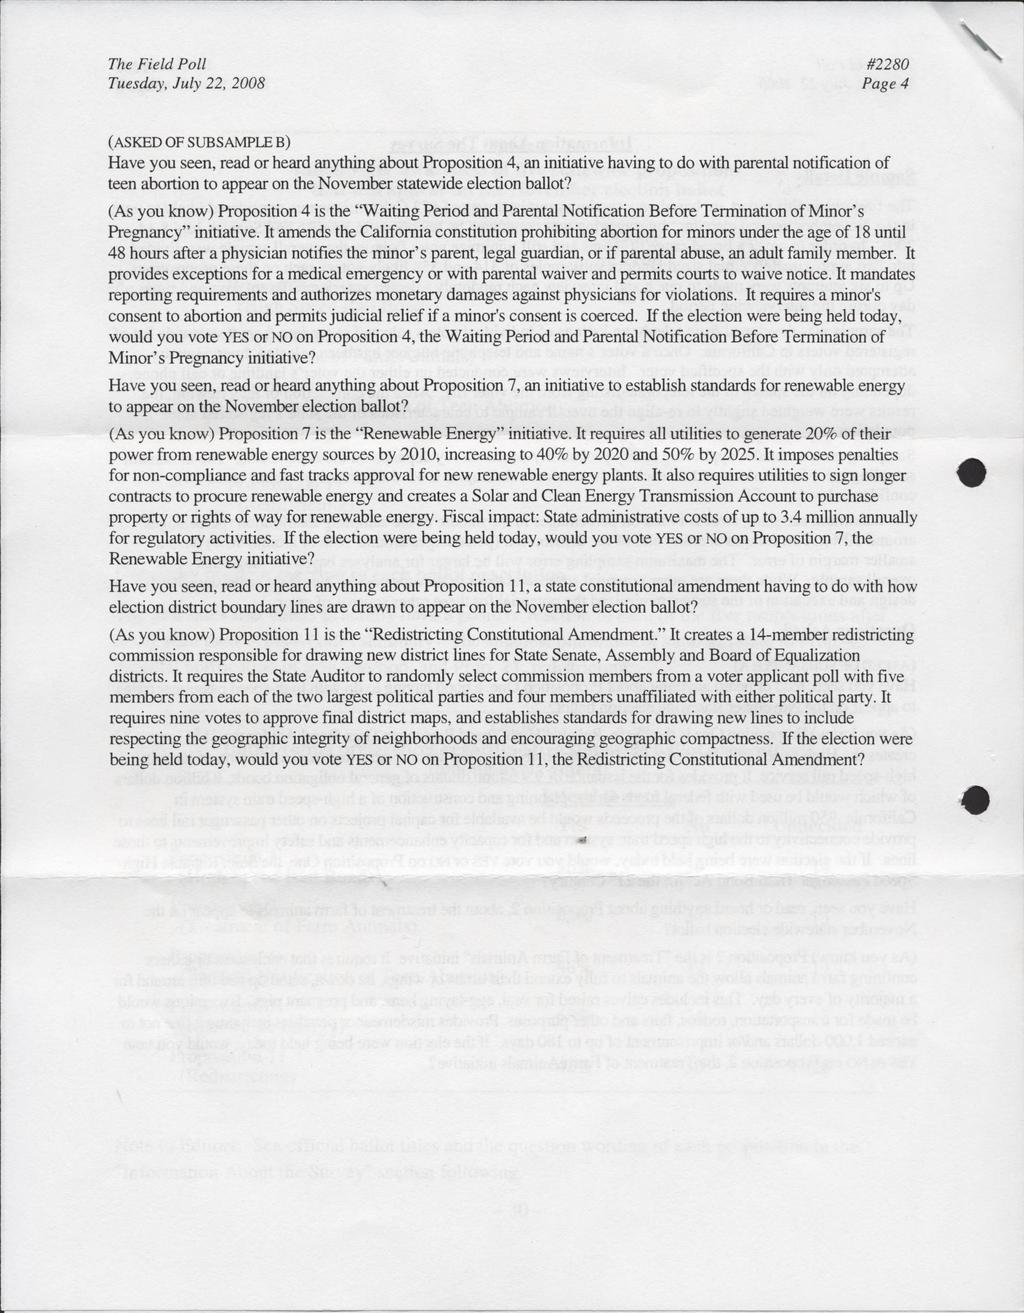 Tuesday, July 22, 2008 #2280 Page 4 (ASKED OF SUBSAMPLE B) Have you seen, read or heard anything about Proposition 4, an initiative having to do with parental notification of teen abortion to appear